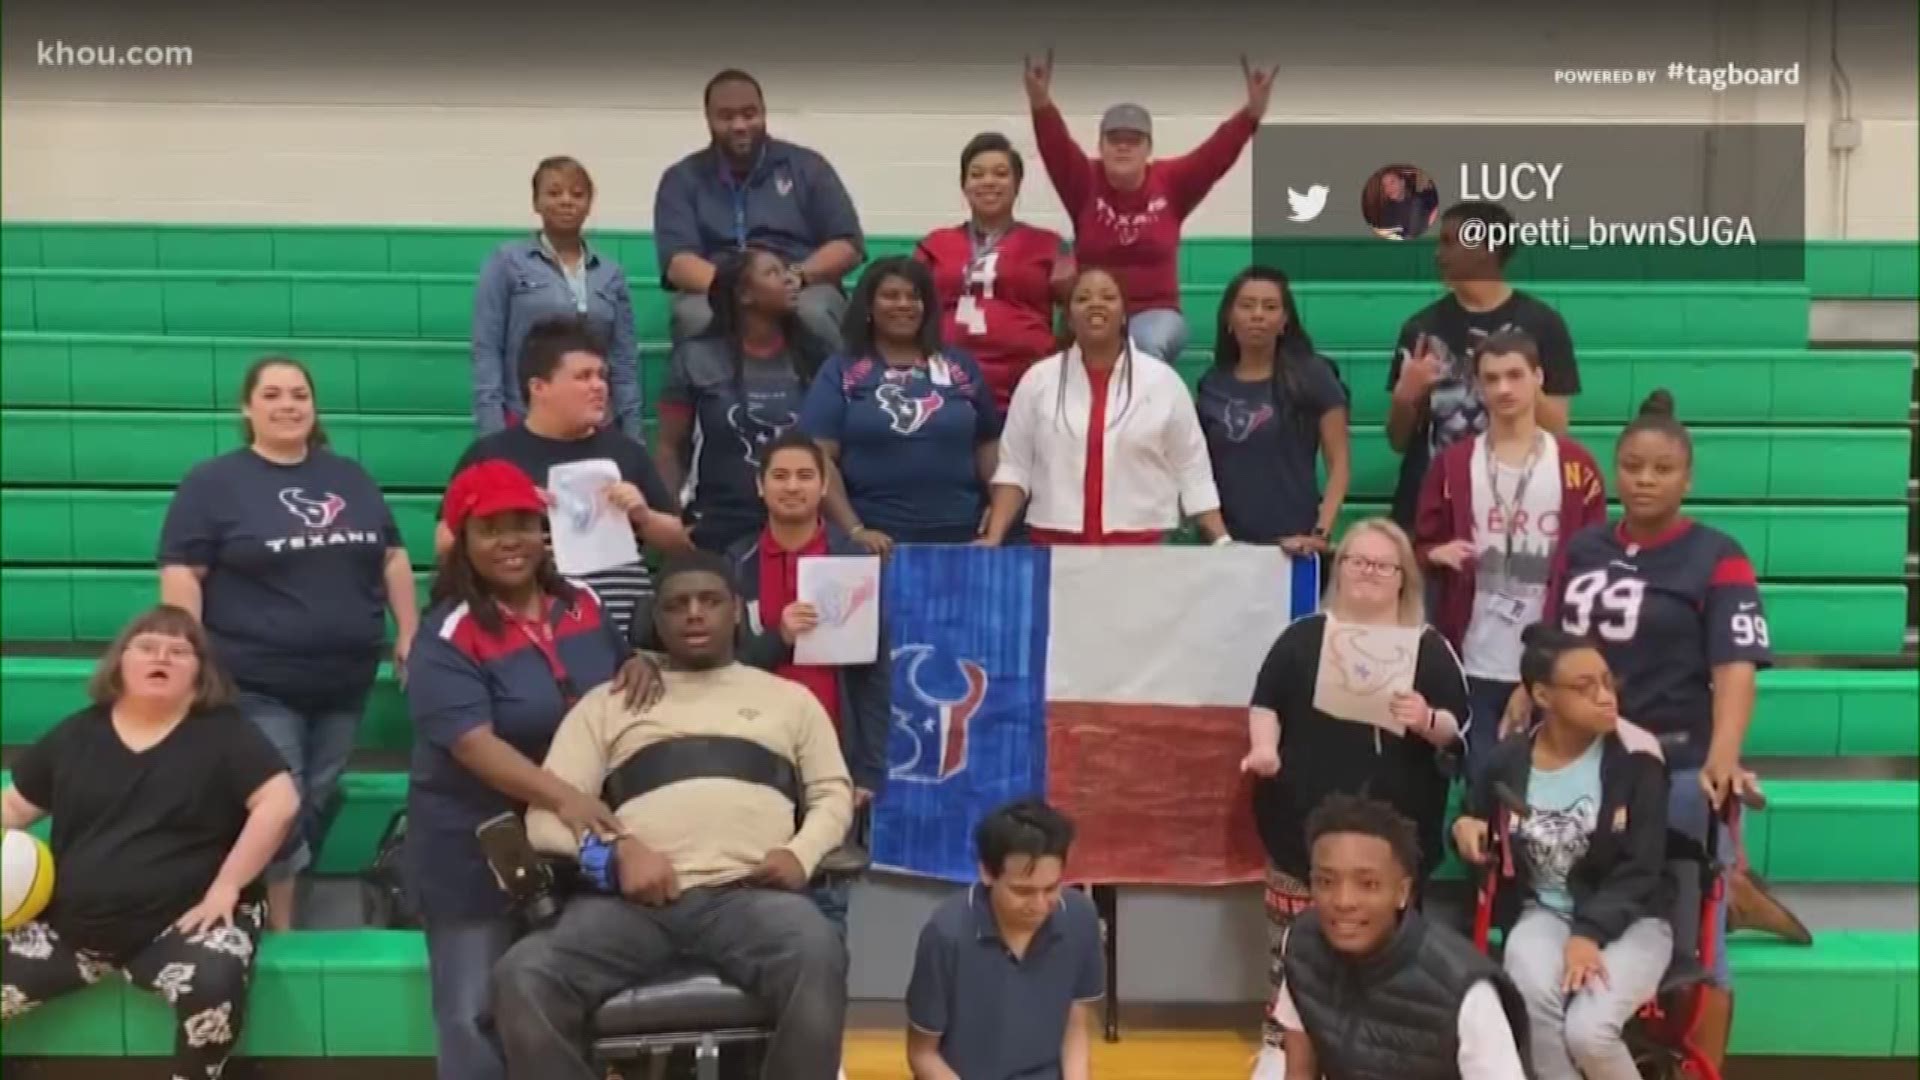 Schools all throughout the Houston area submitted videos of students cheering on the Texans before their Divisional Round game against the Chiefs Sunday.